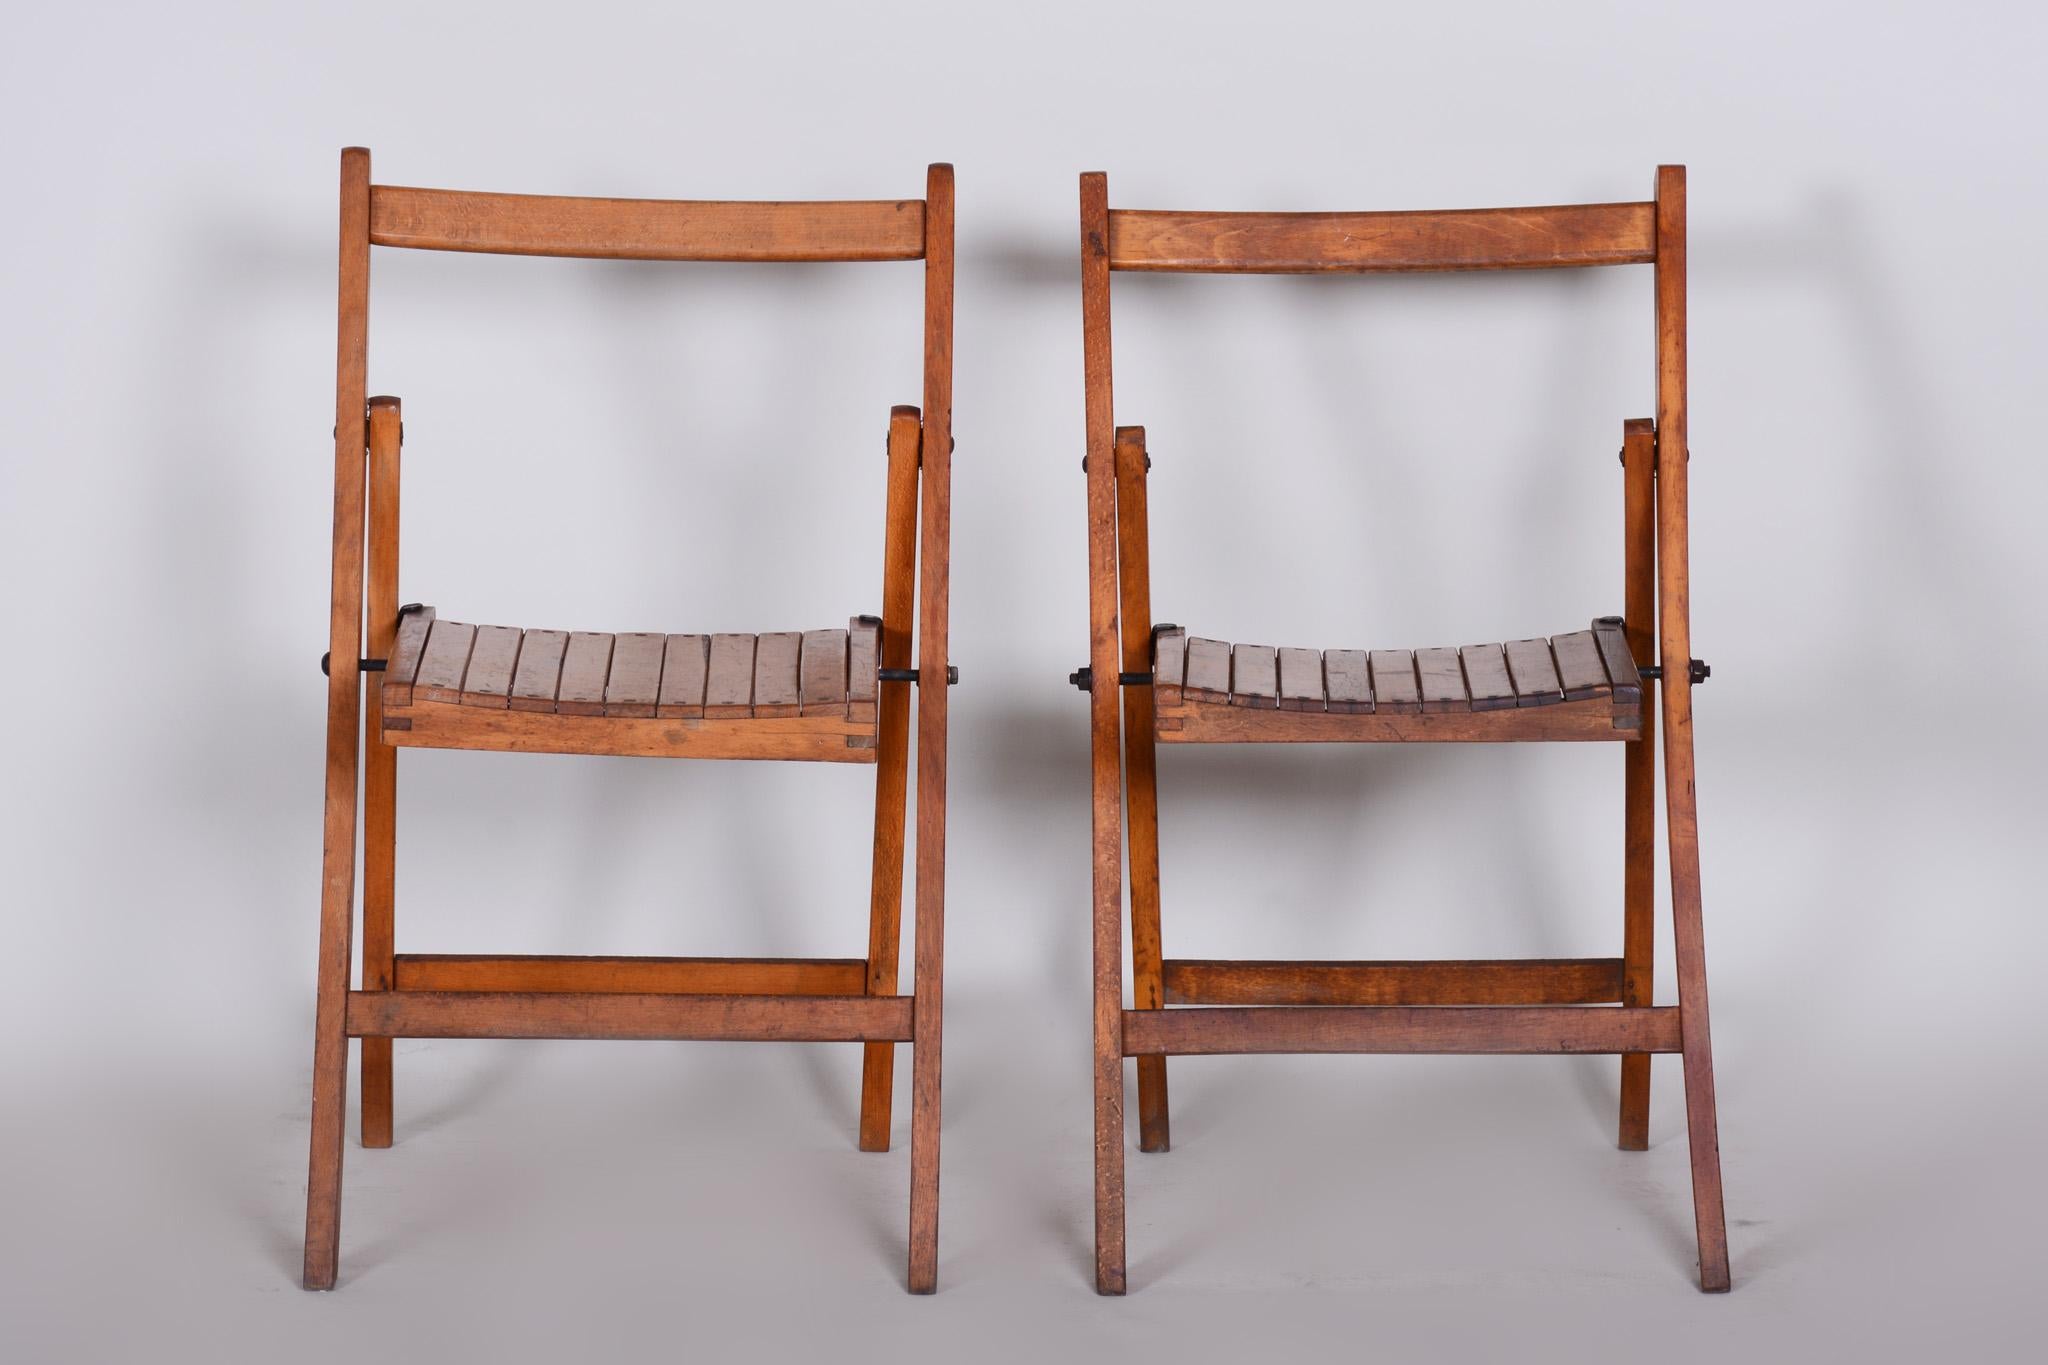 Czech midcentury chairs, 3 pieces.
Material: Beech
Period: 1950-1959
Original preserved condition.